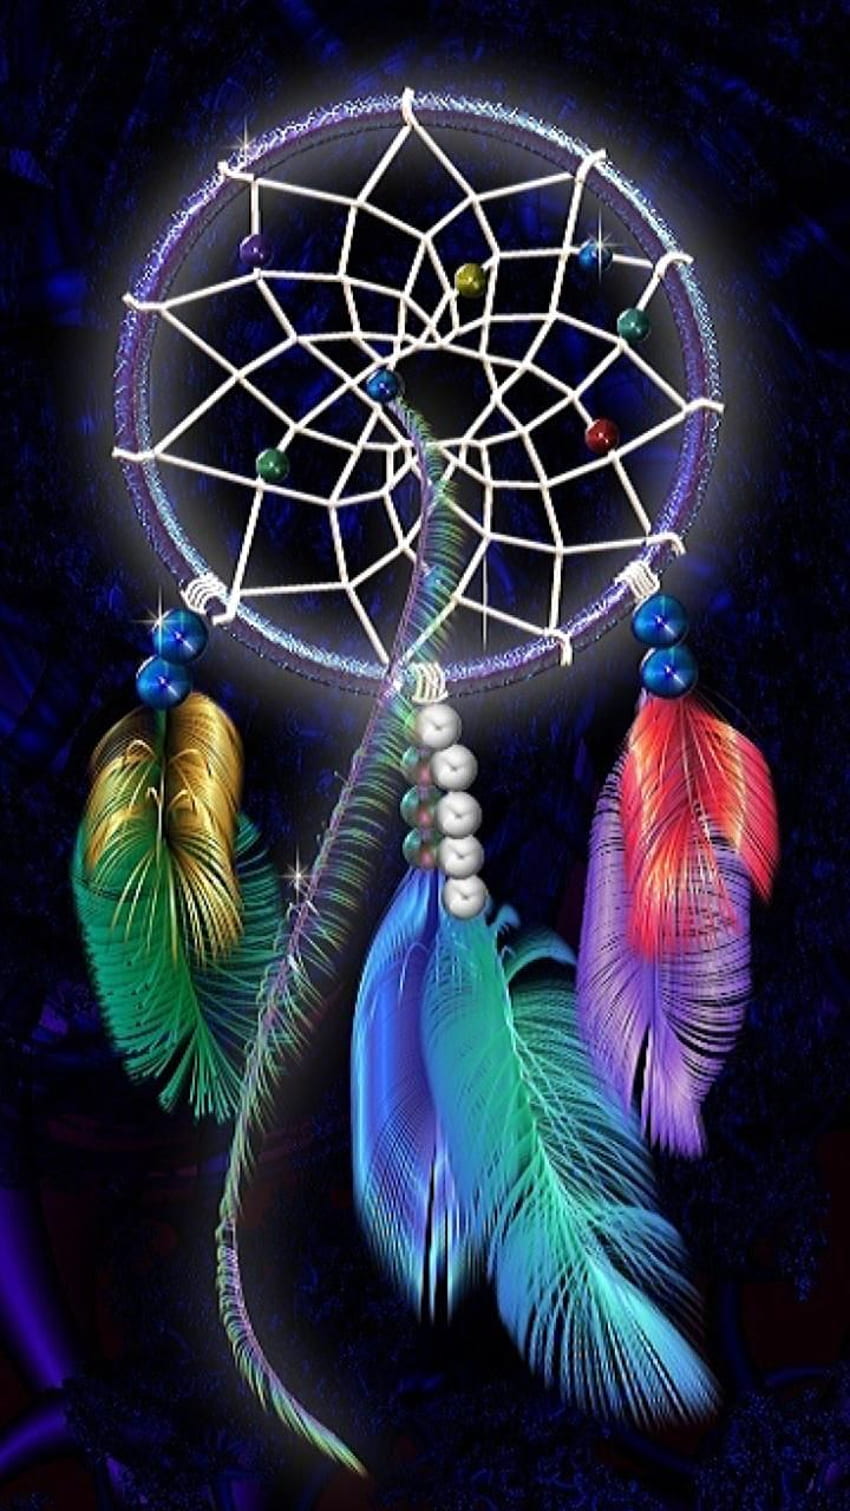 Dreamcatcher by EDeCoster - ea now. Browse millio. Indian dream catcher, Dreamcatcher , Dream catcher native american, Cool Dream Catcher HD phone wallpaper